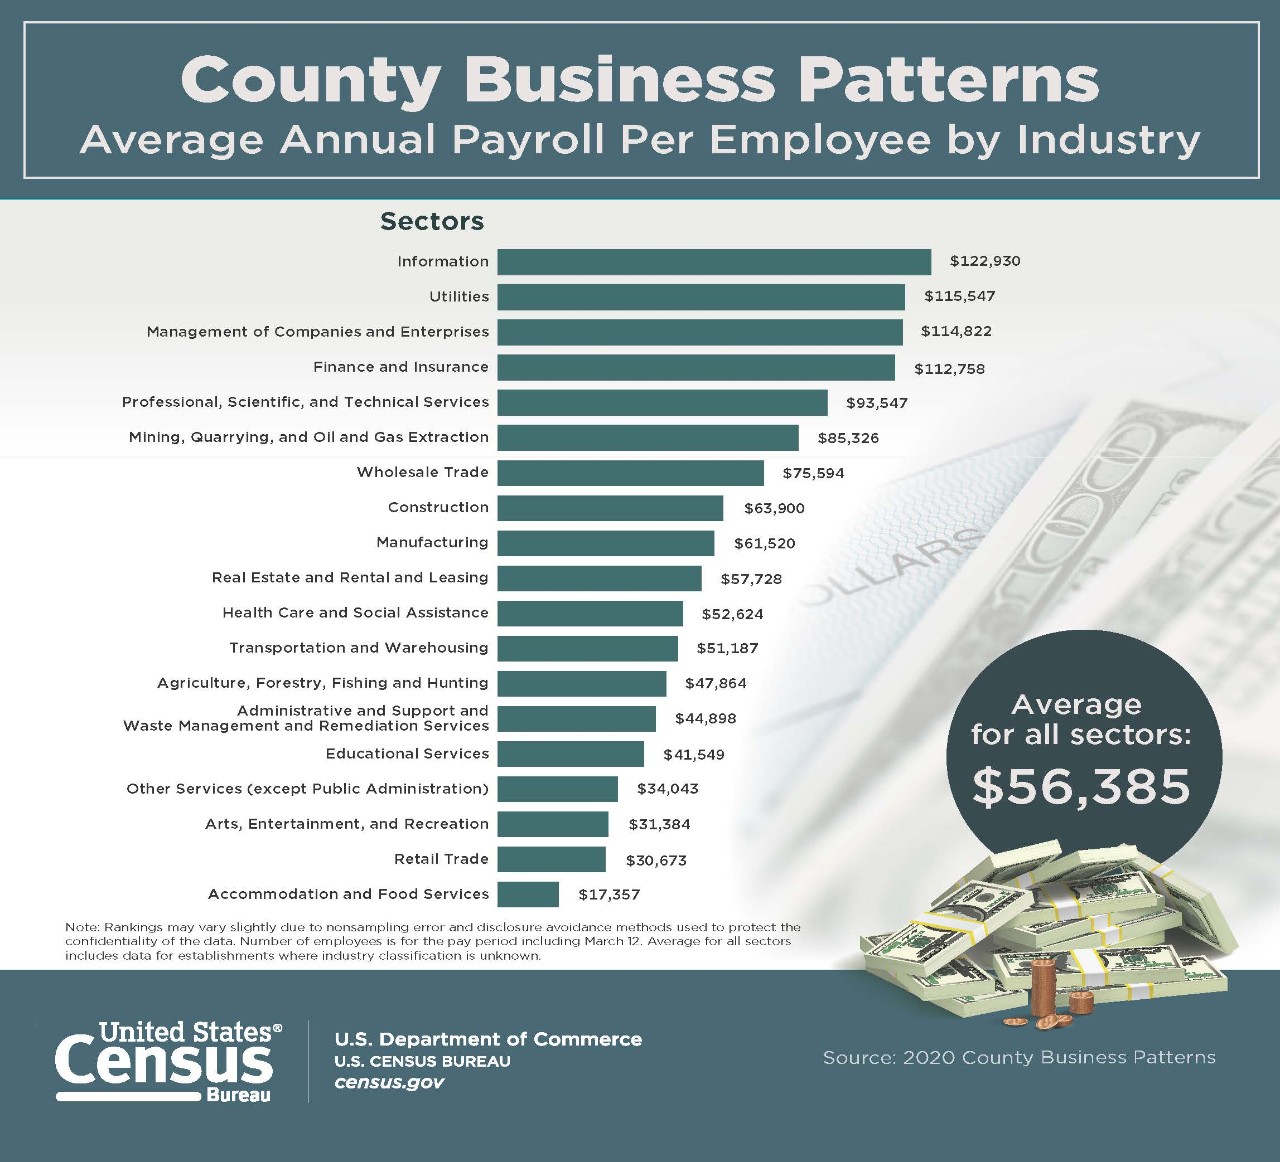 County Business Patterns: Average Annual Payroll Per Employee by Industry